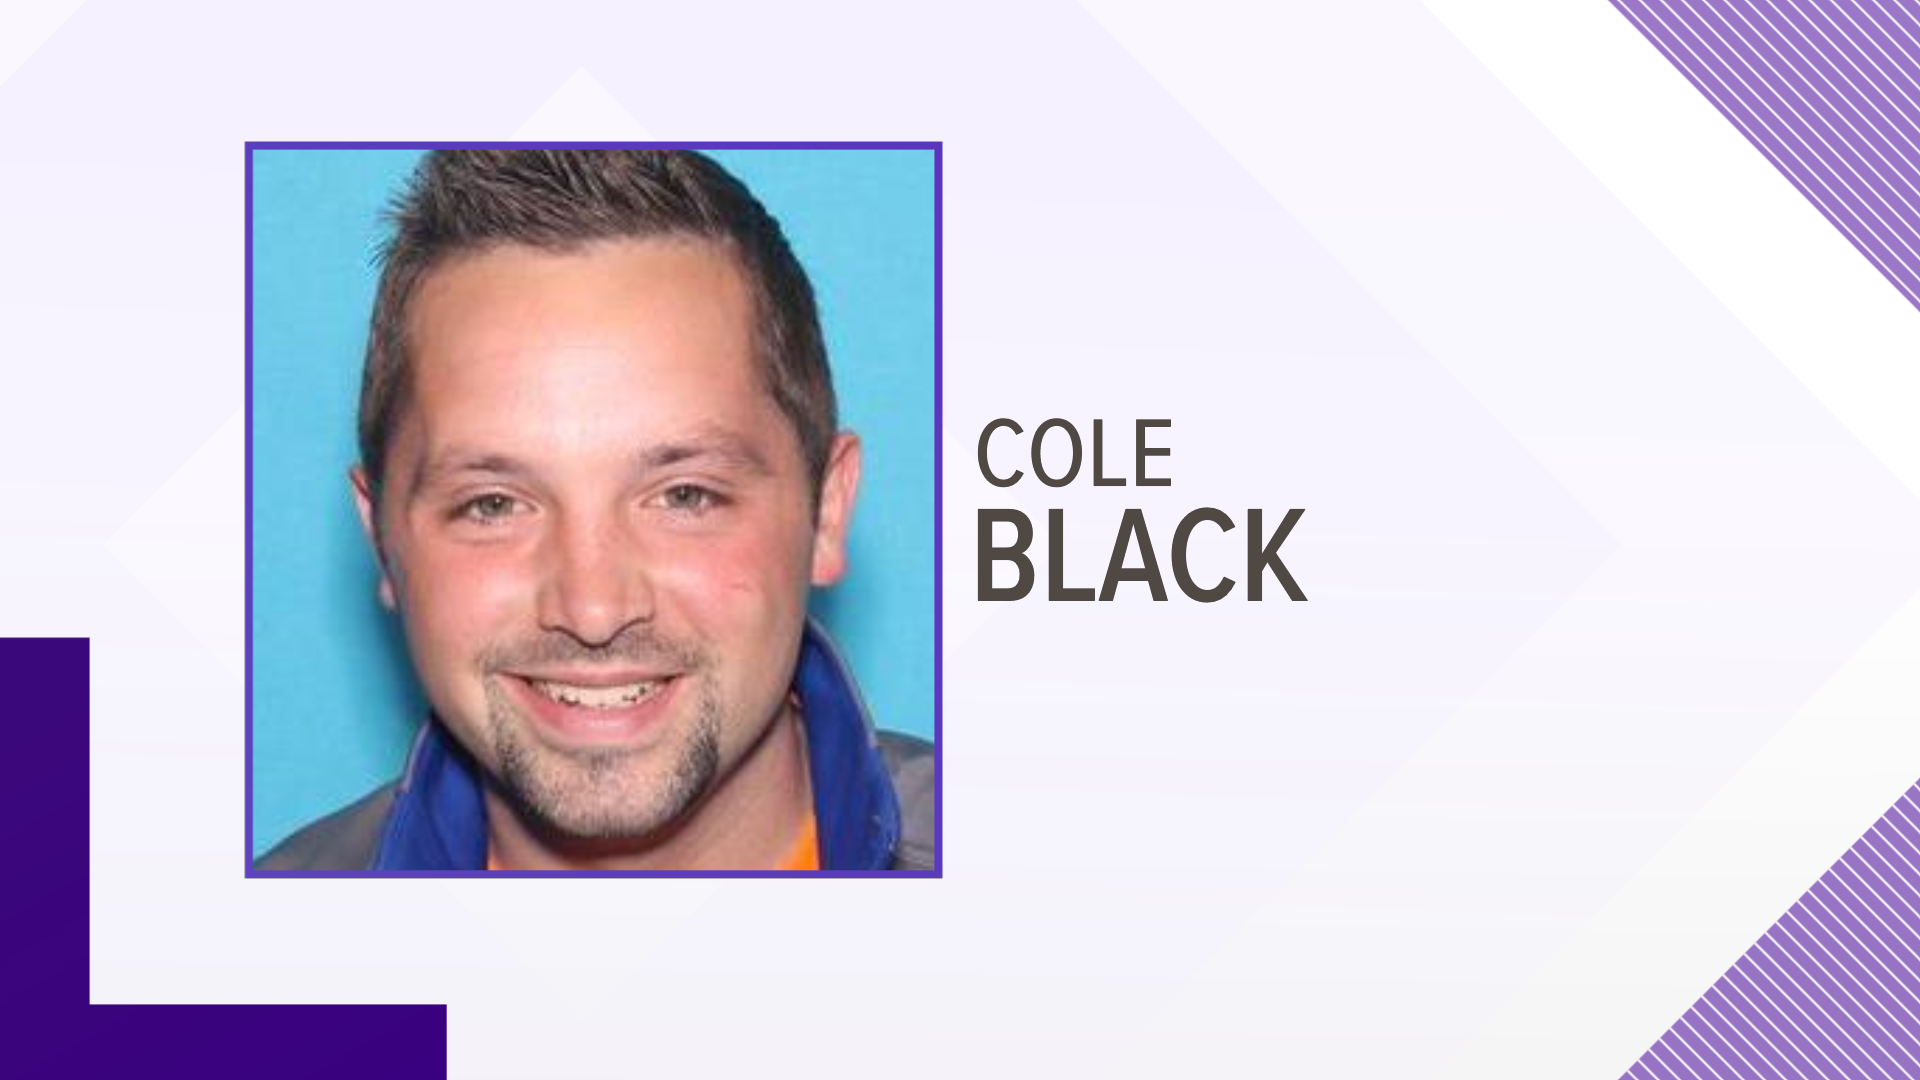 Cole Black pleaded guilty in March to having sexual contact with a student.